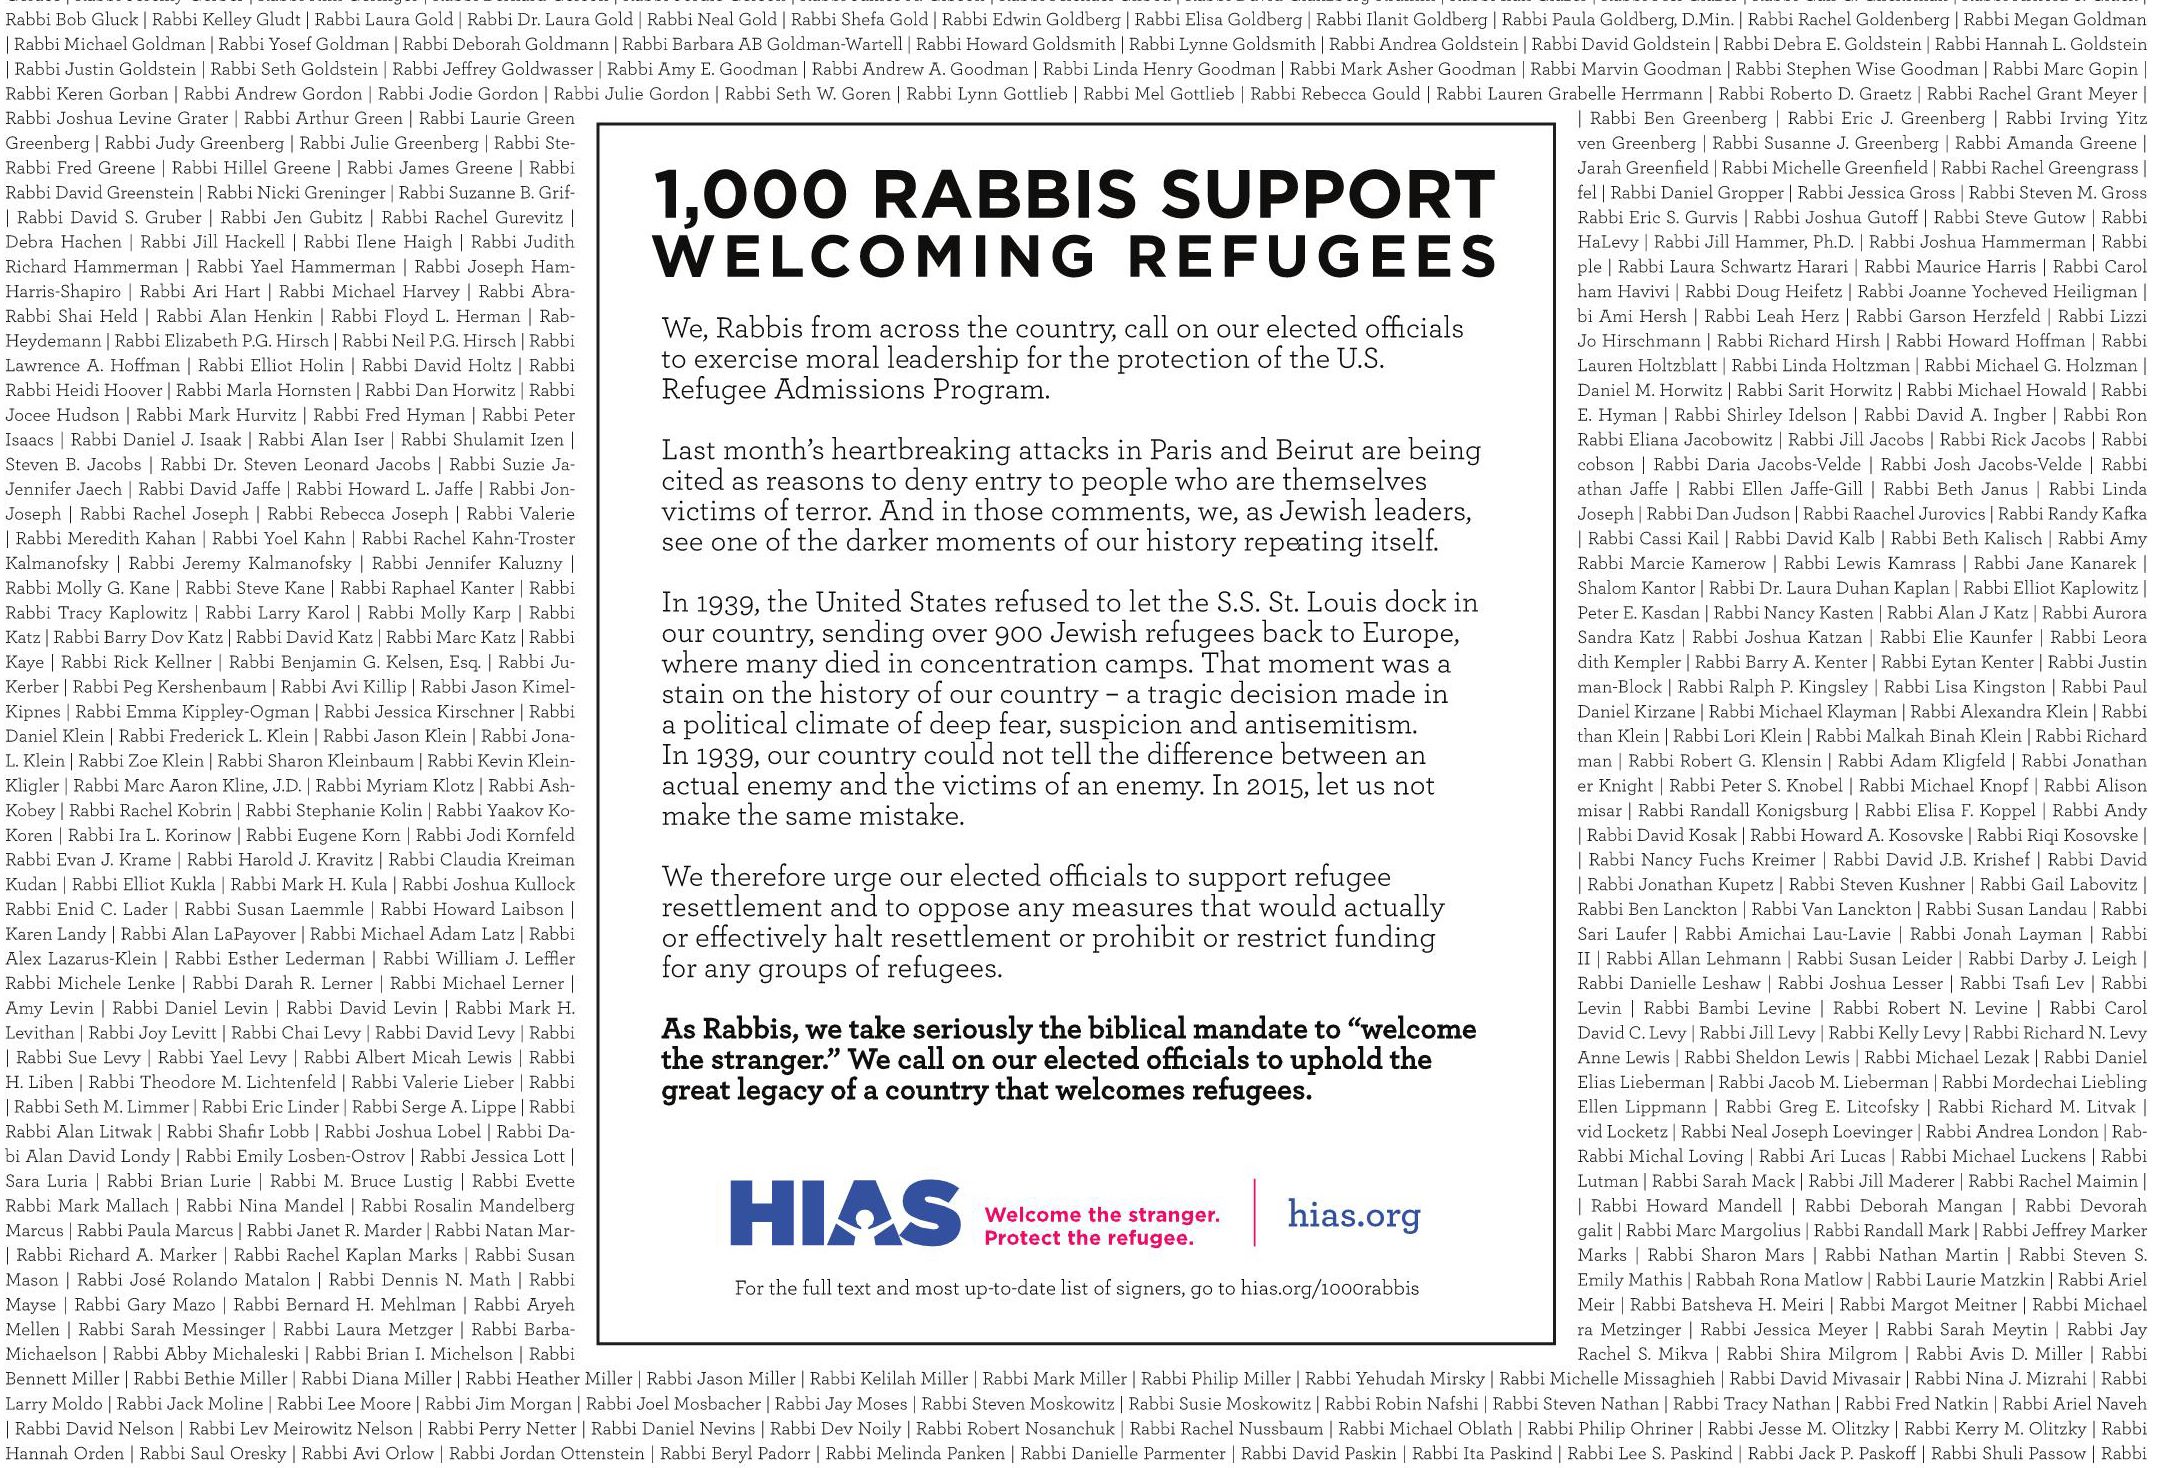 In the News: #1000Rabbis Urge U.S. to Welcome Refugees